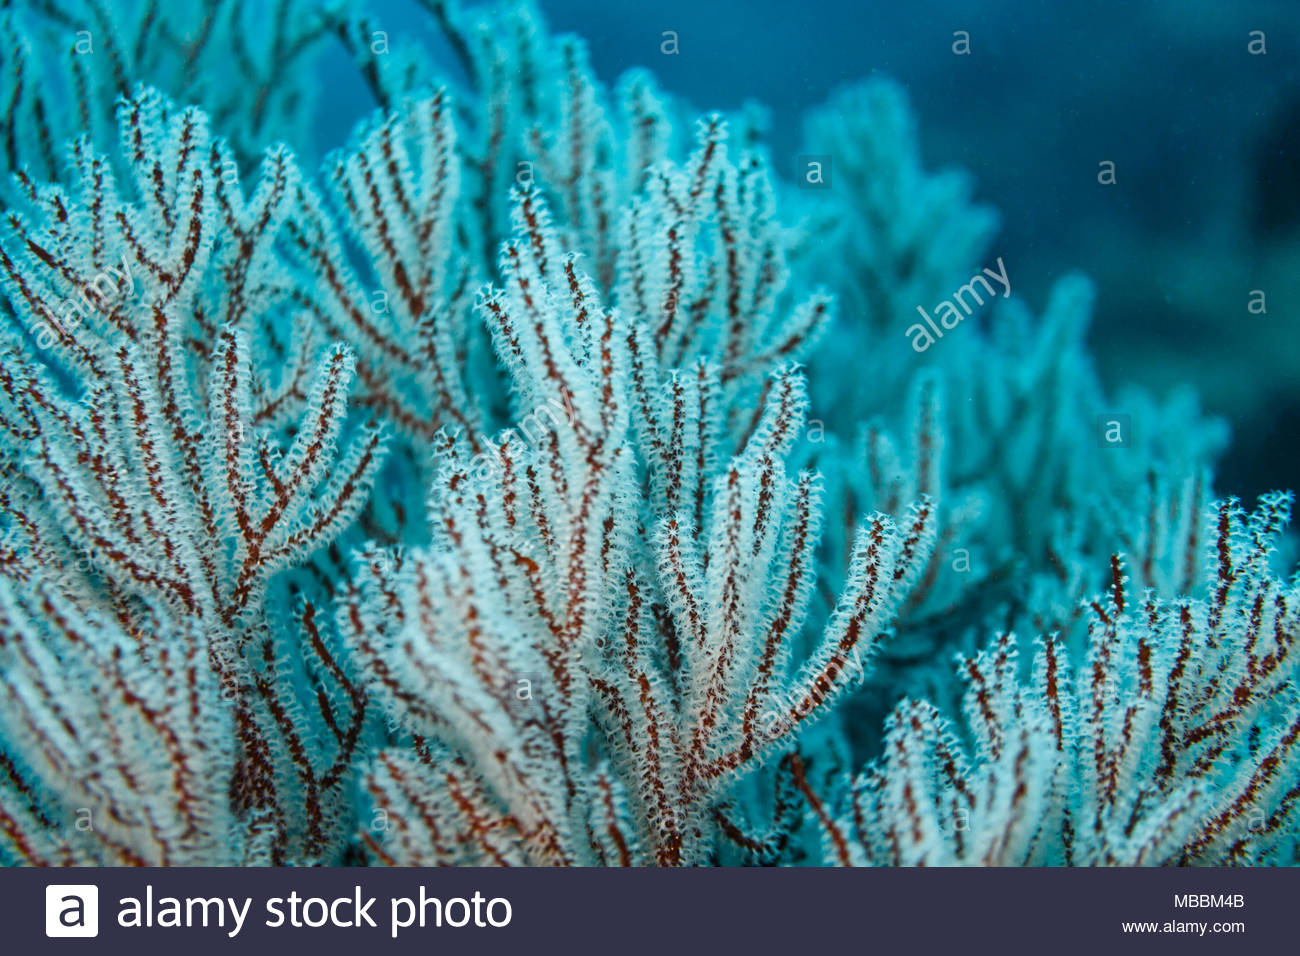 White Polyps Extended From Red Branching Coral Colony Millepora